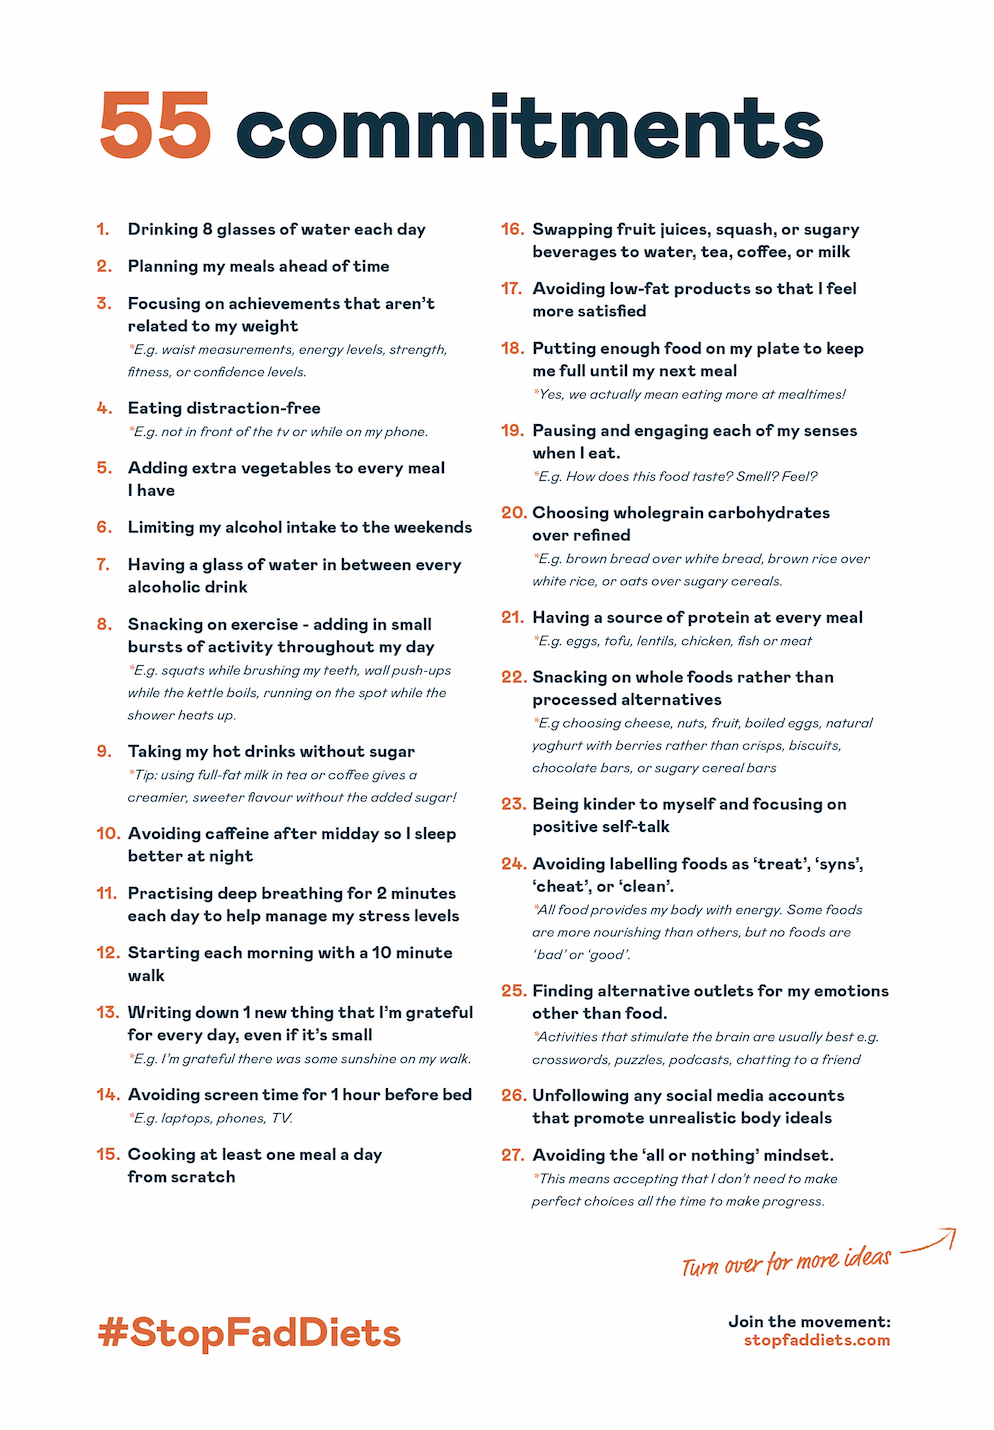 A list of 55 different commitments other than going on a fad diet